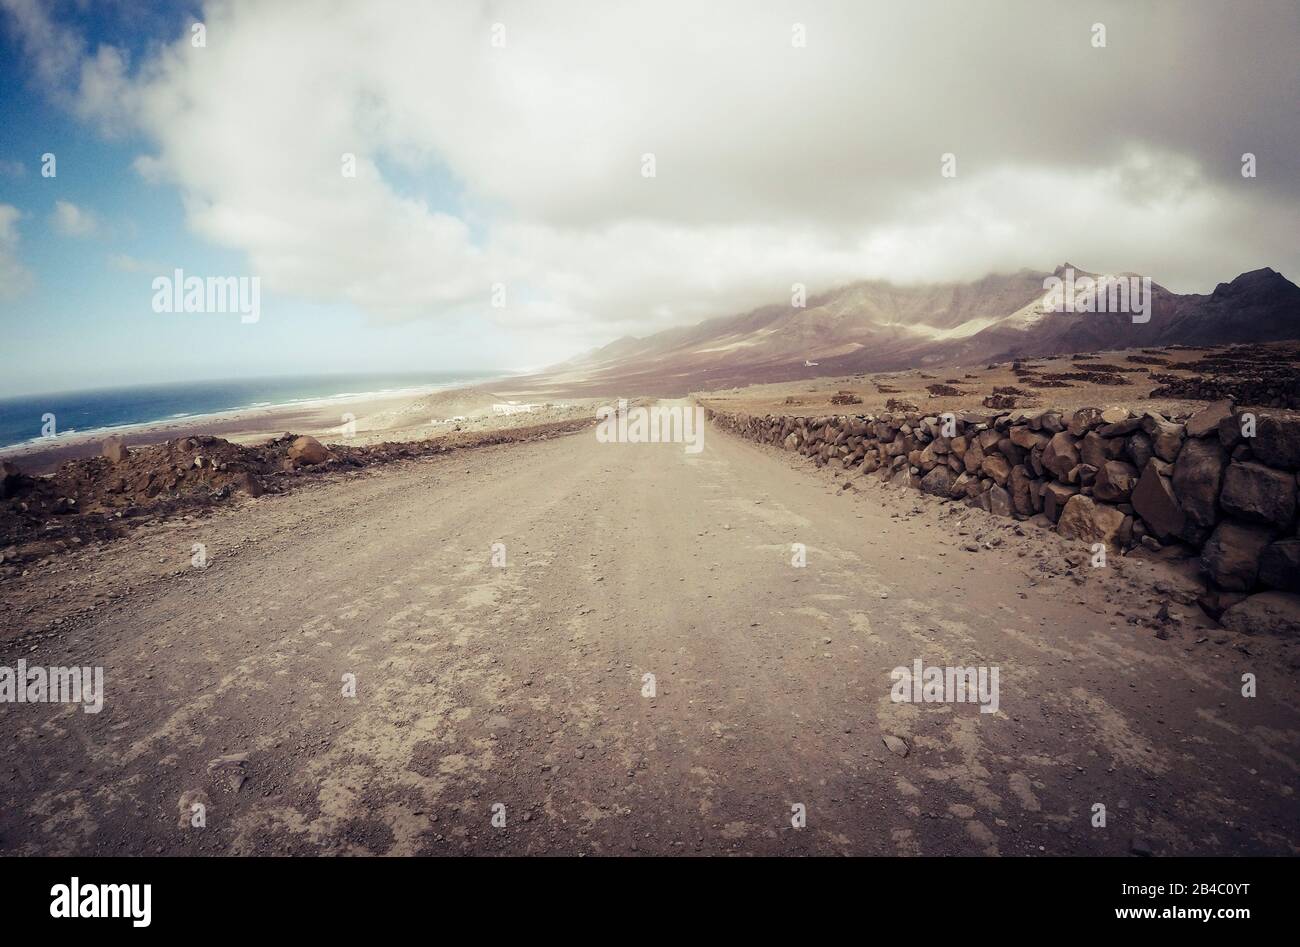 Long off road terrain way road viewed from ground level with mountains and coastline ocean view - travel and adventure concept for alternative vacation and lifestyle Stock Photo